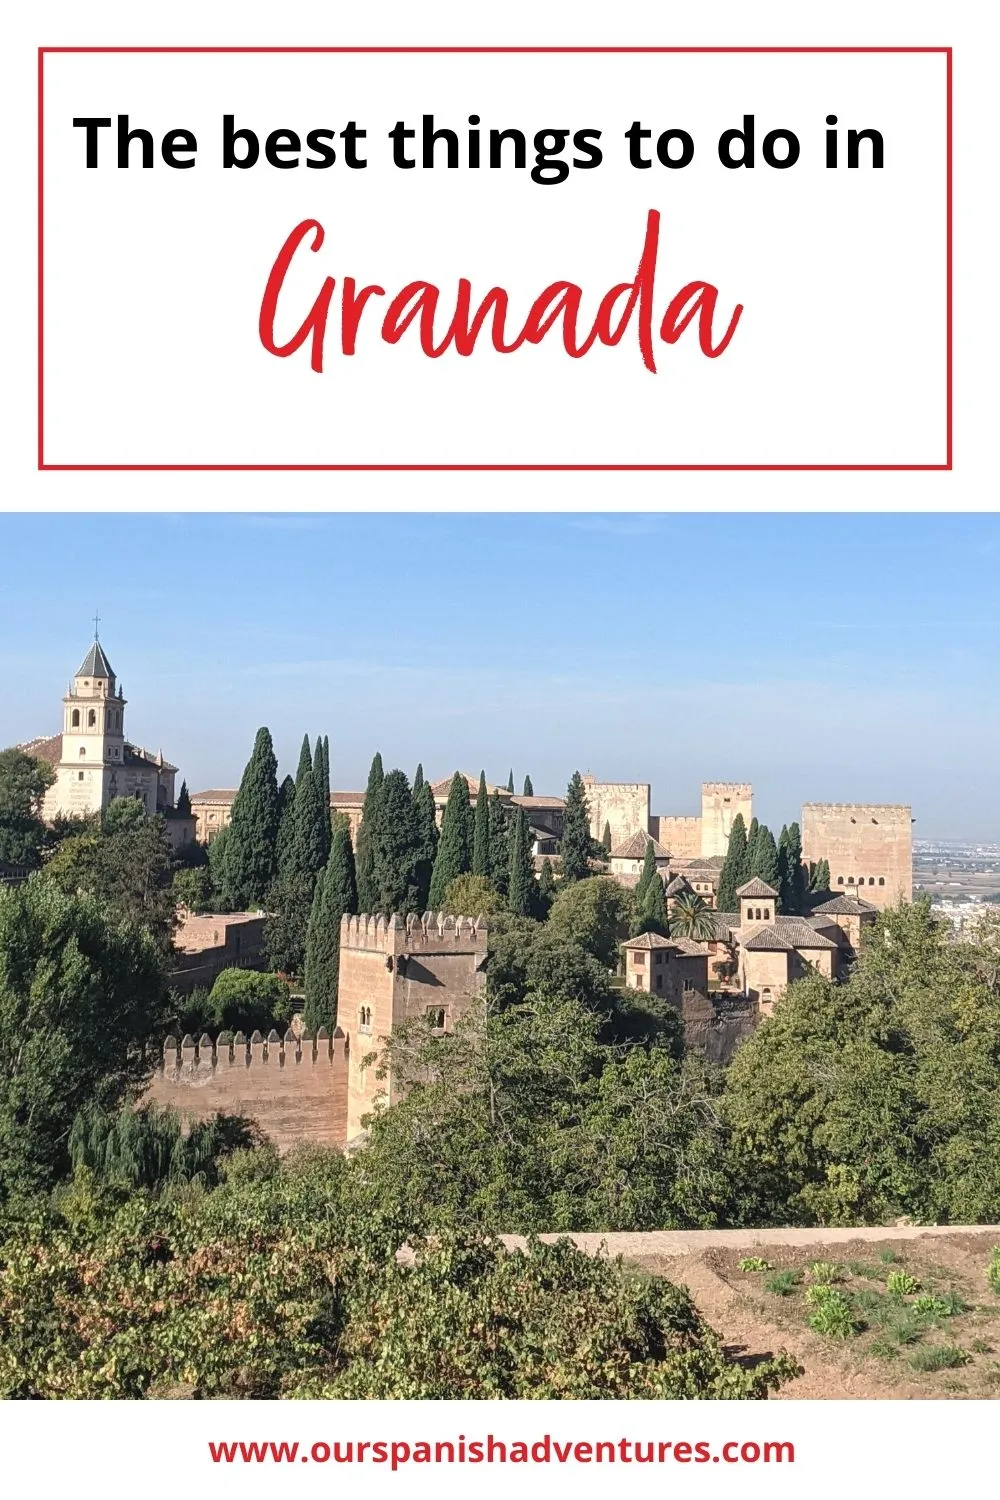 The best things to do in Granada | Our Spanish Adventures